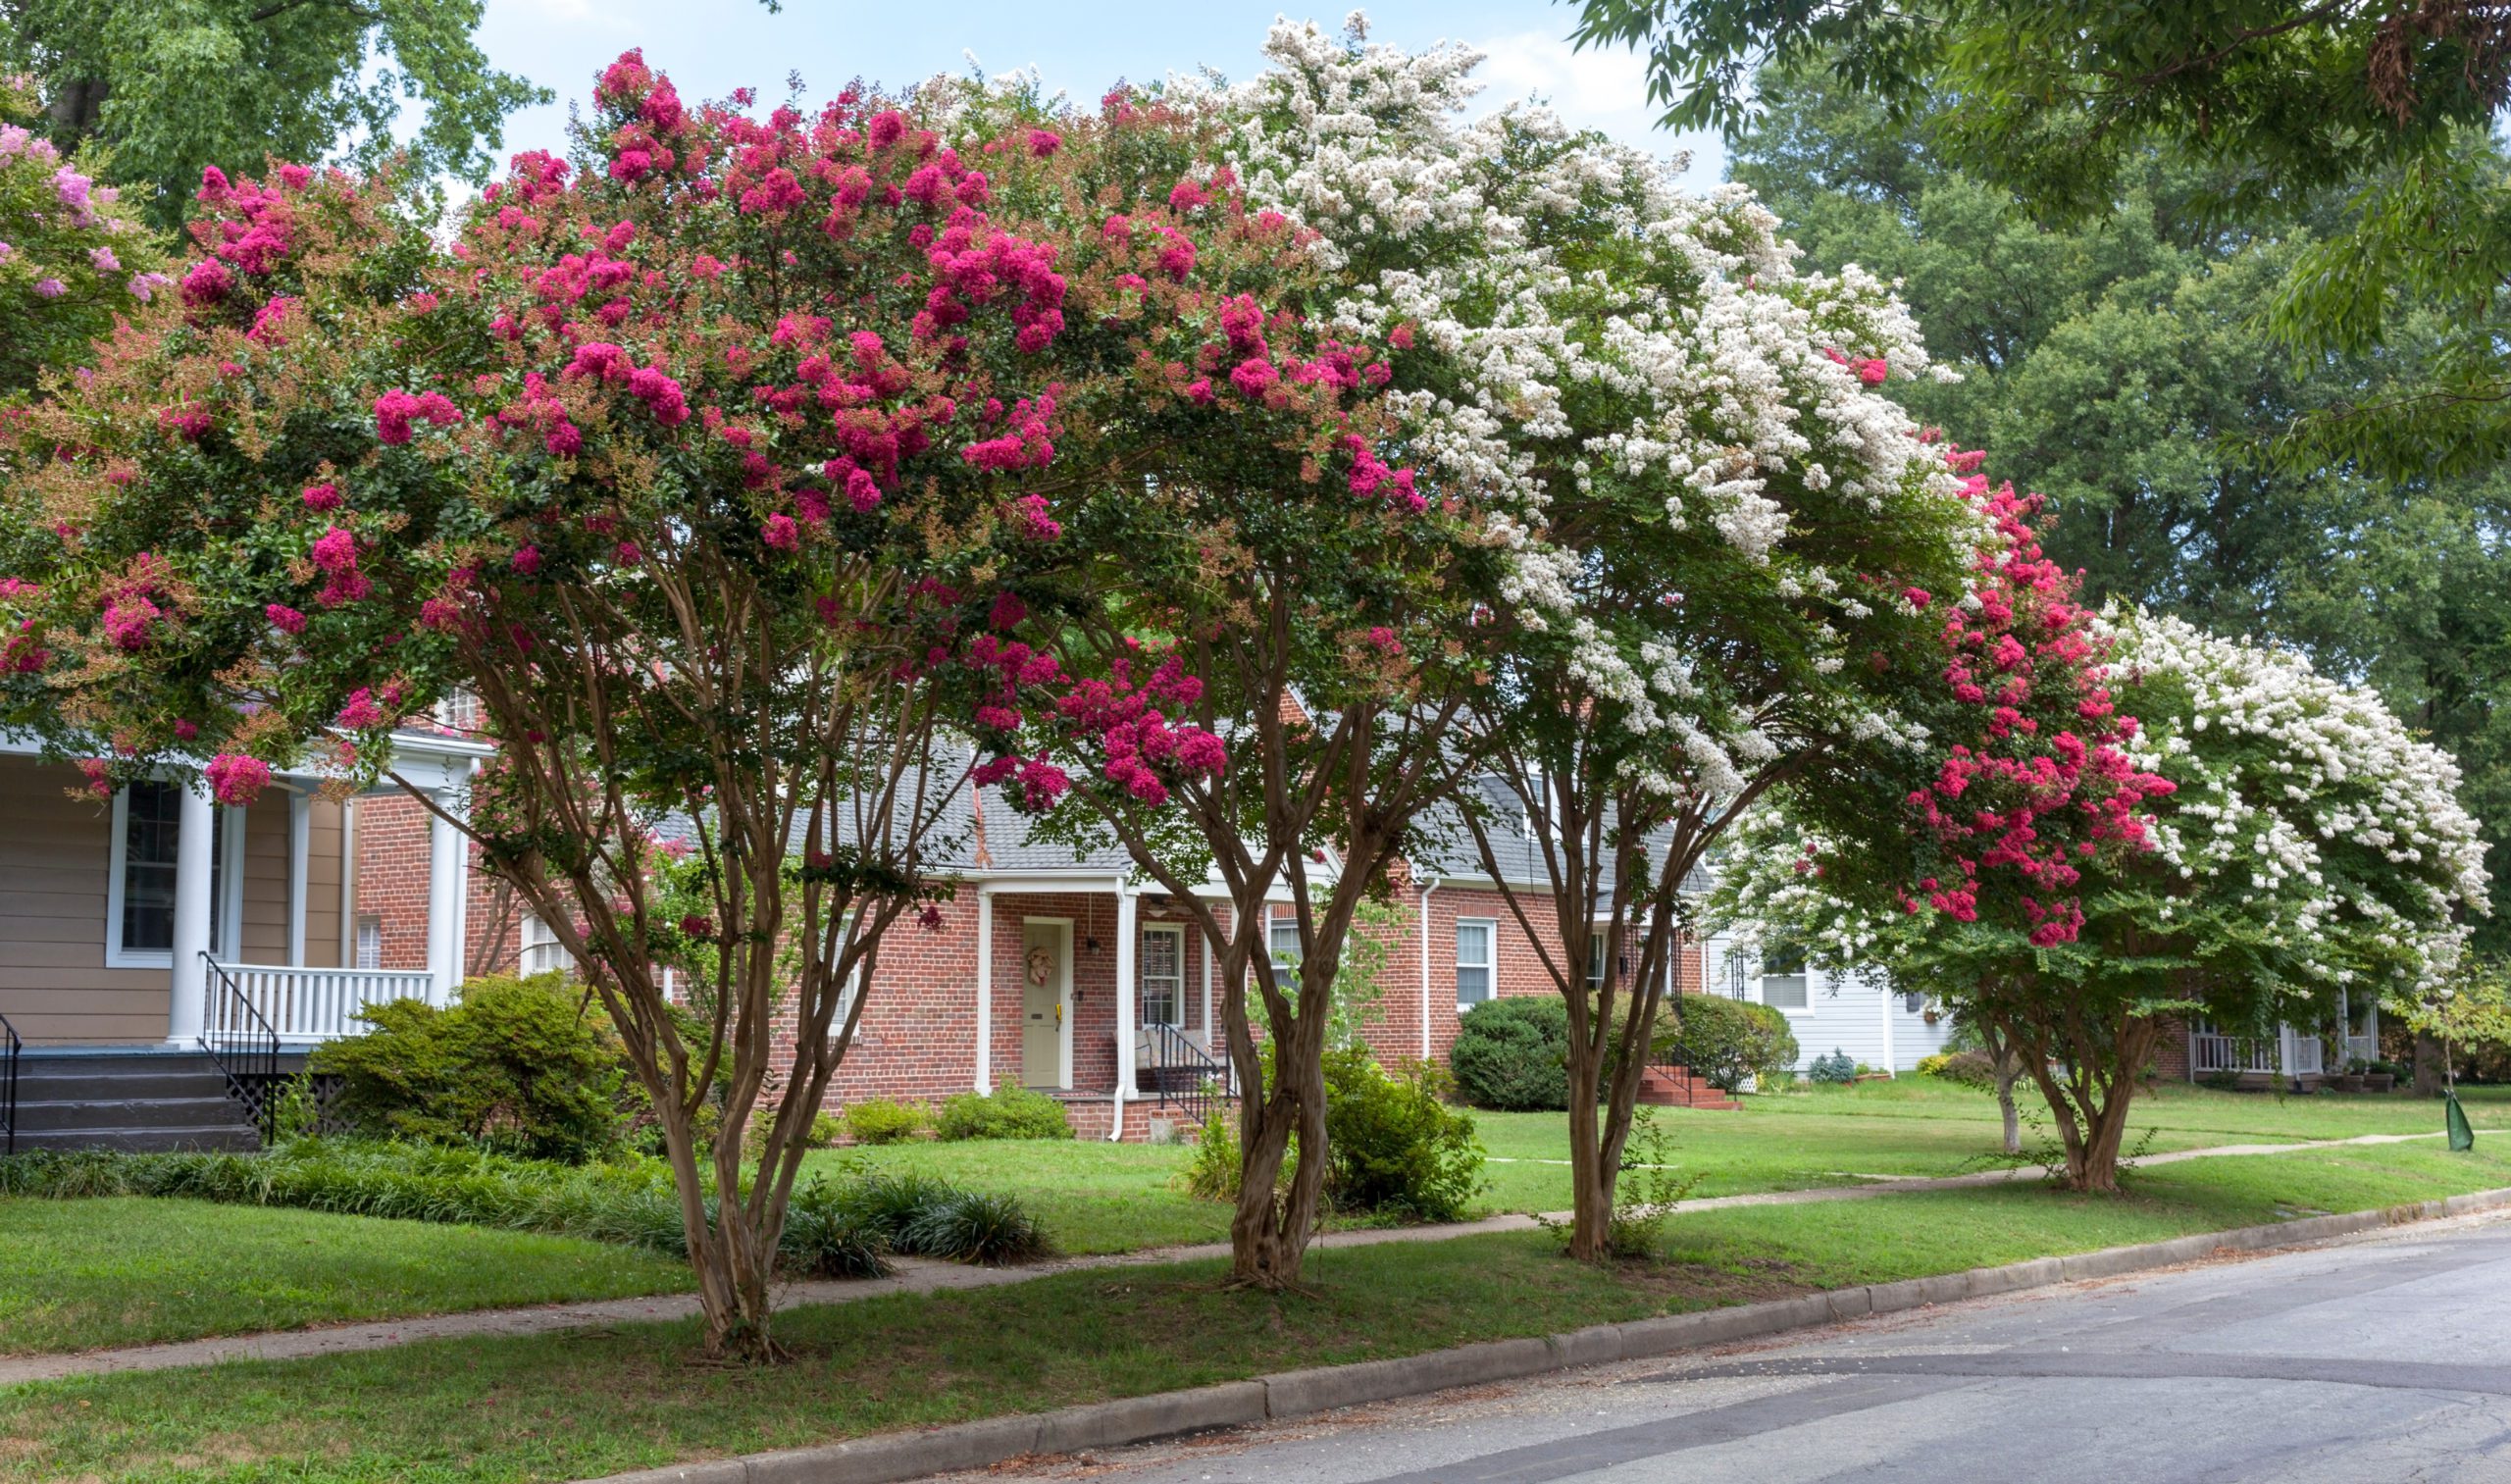 Red,And,White,Crepe,Myrtle,Trees,On,Residential,Neighborhood,Street.